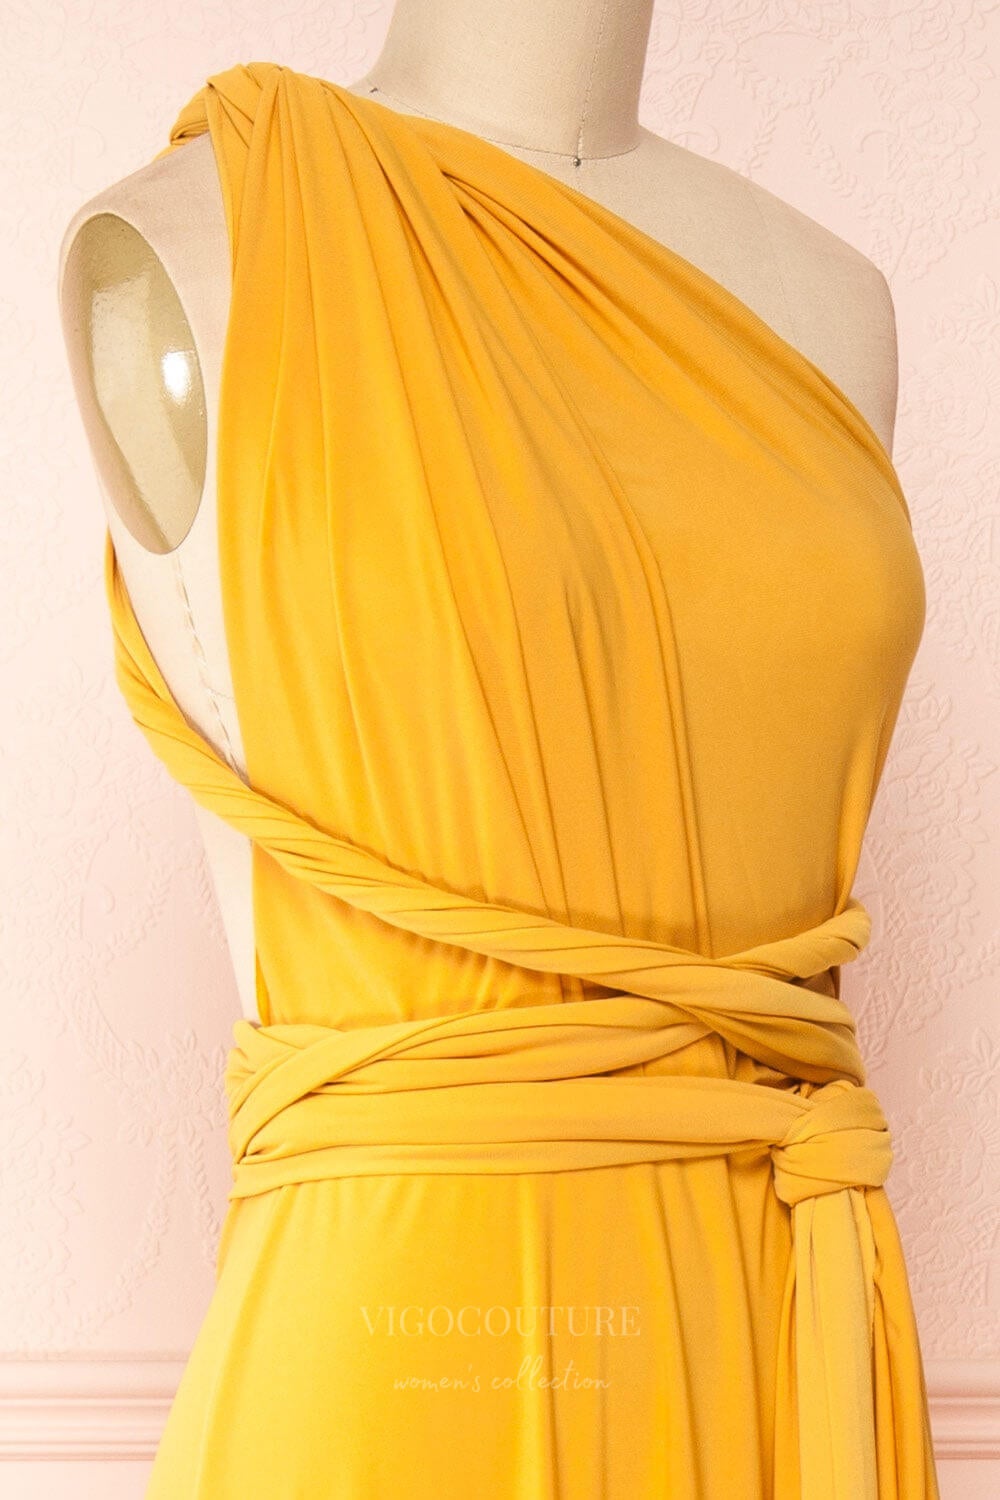 vigocouture-Convertible Bridesmaid Dress Stretchable Woven Dress Pleated Prom Dress Multiway Dress 20860-Yellow-Prom Dresses-vigocouture-